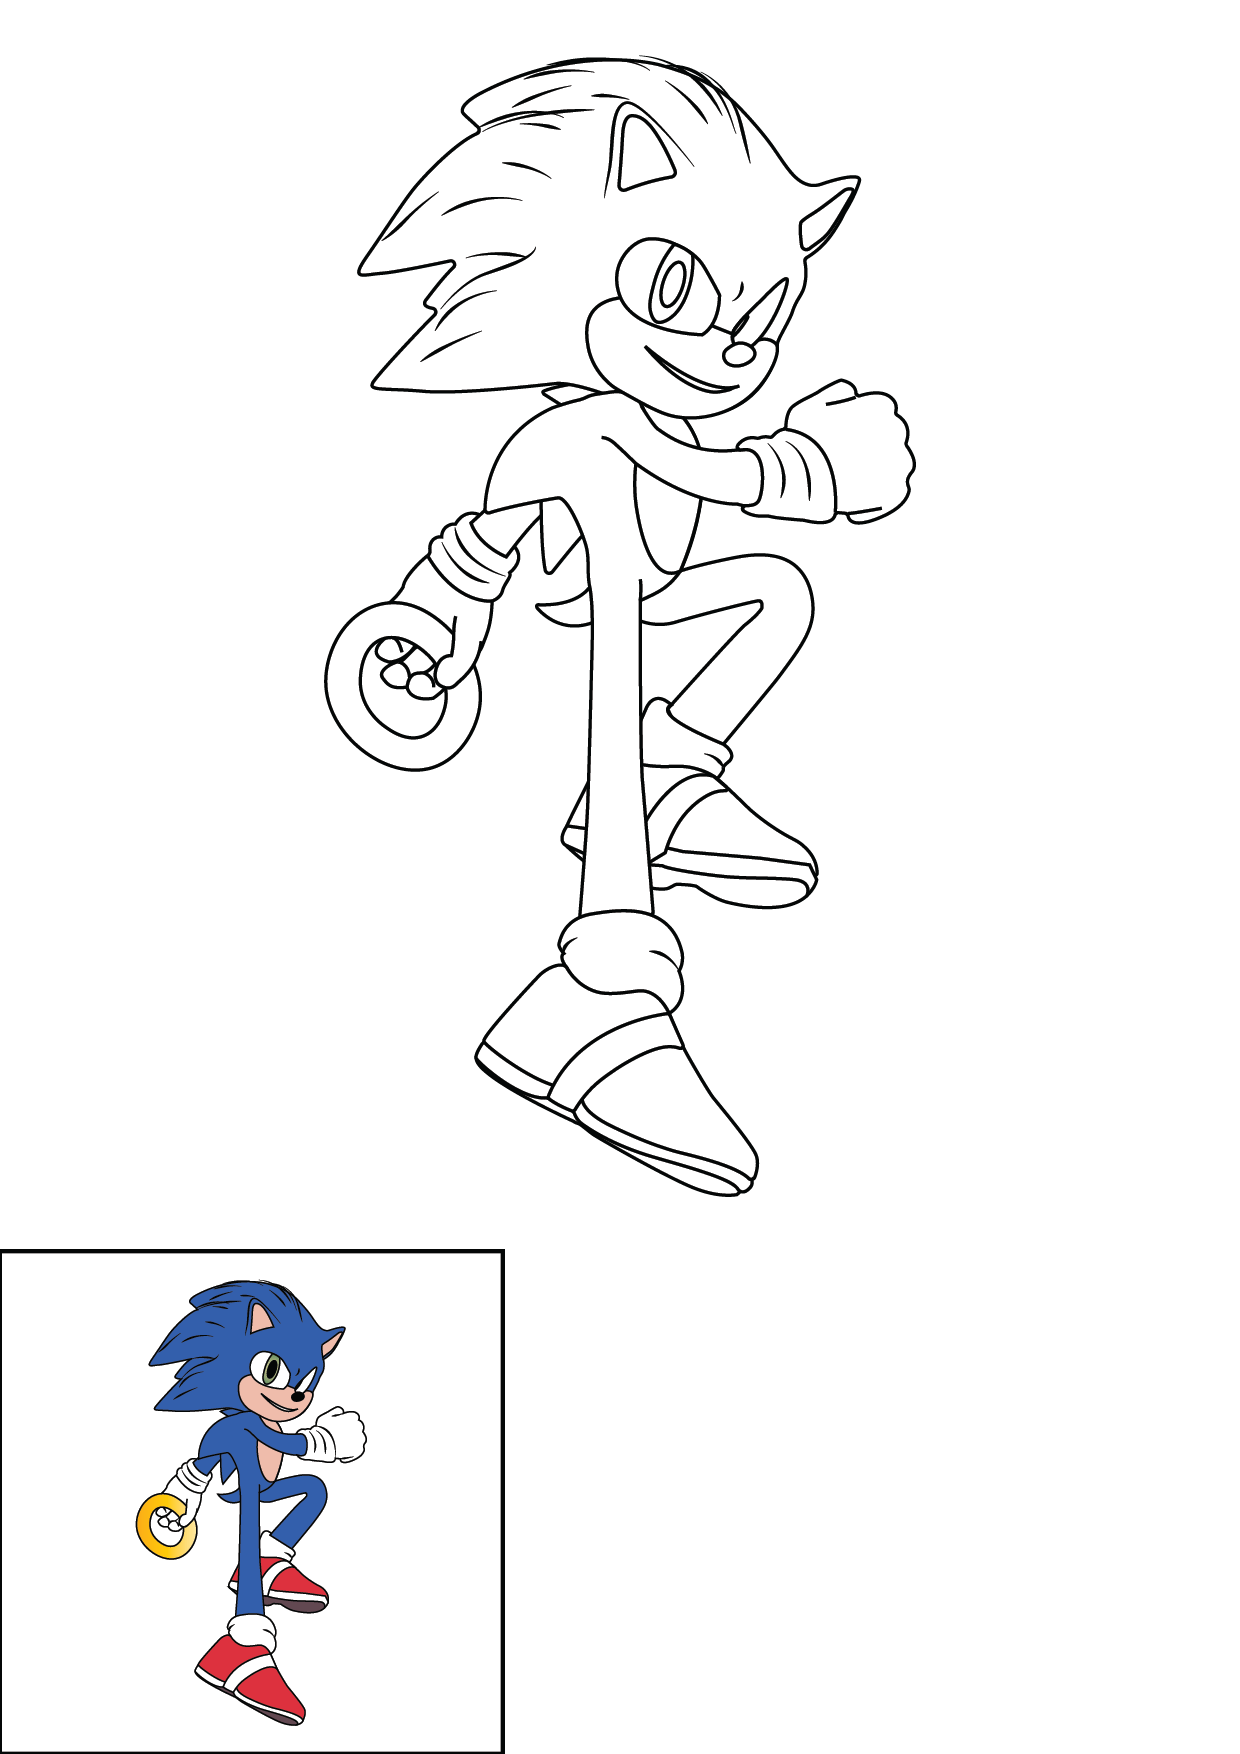 How to Draw Sonic The Hedgehog Step by Step Printable Color